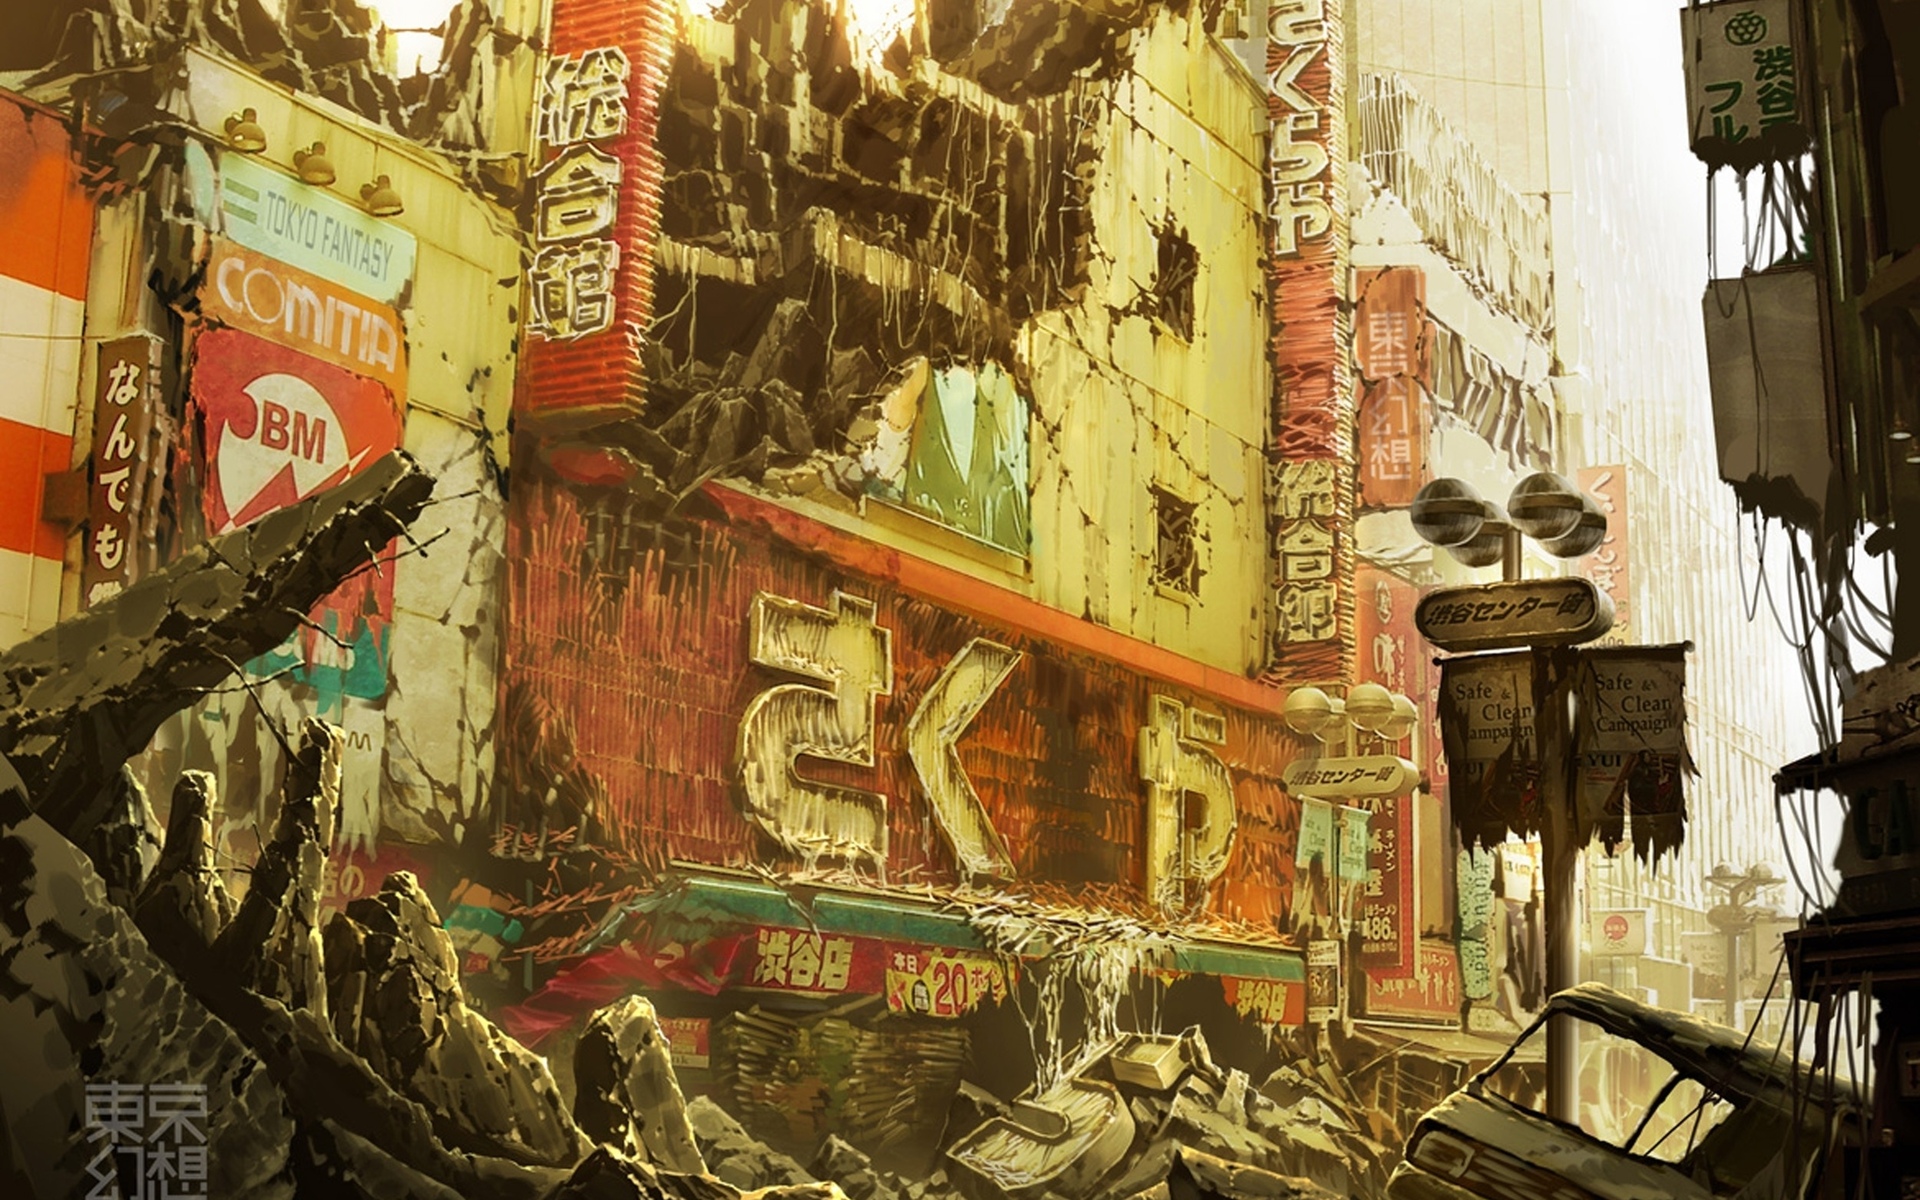 post, Apocalyptic, Tokyogenso, Asian, Oriental, Japan, Tokyo, Ruin, Decay, Destruction, Architecture, Buildings, Signs, Roads, Street, Art, Artistic, Cg, Digital, Wreckage, Wreck, Detail, Horror, Scary, Creepy, S Wallpaper